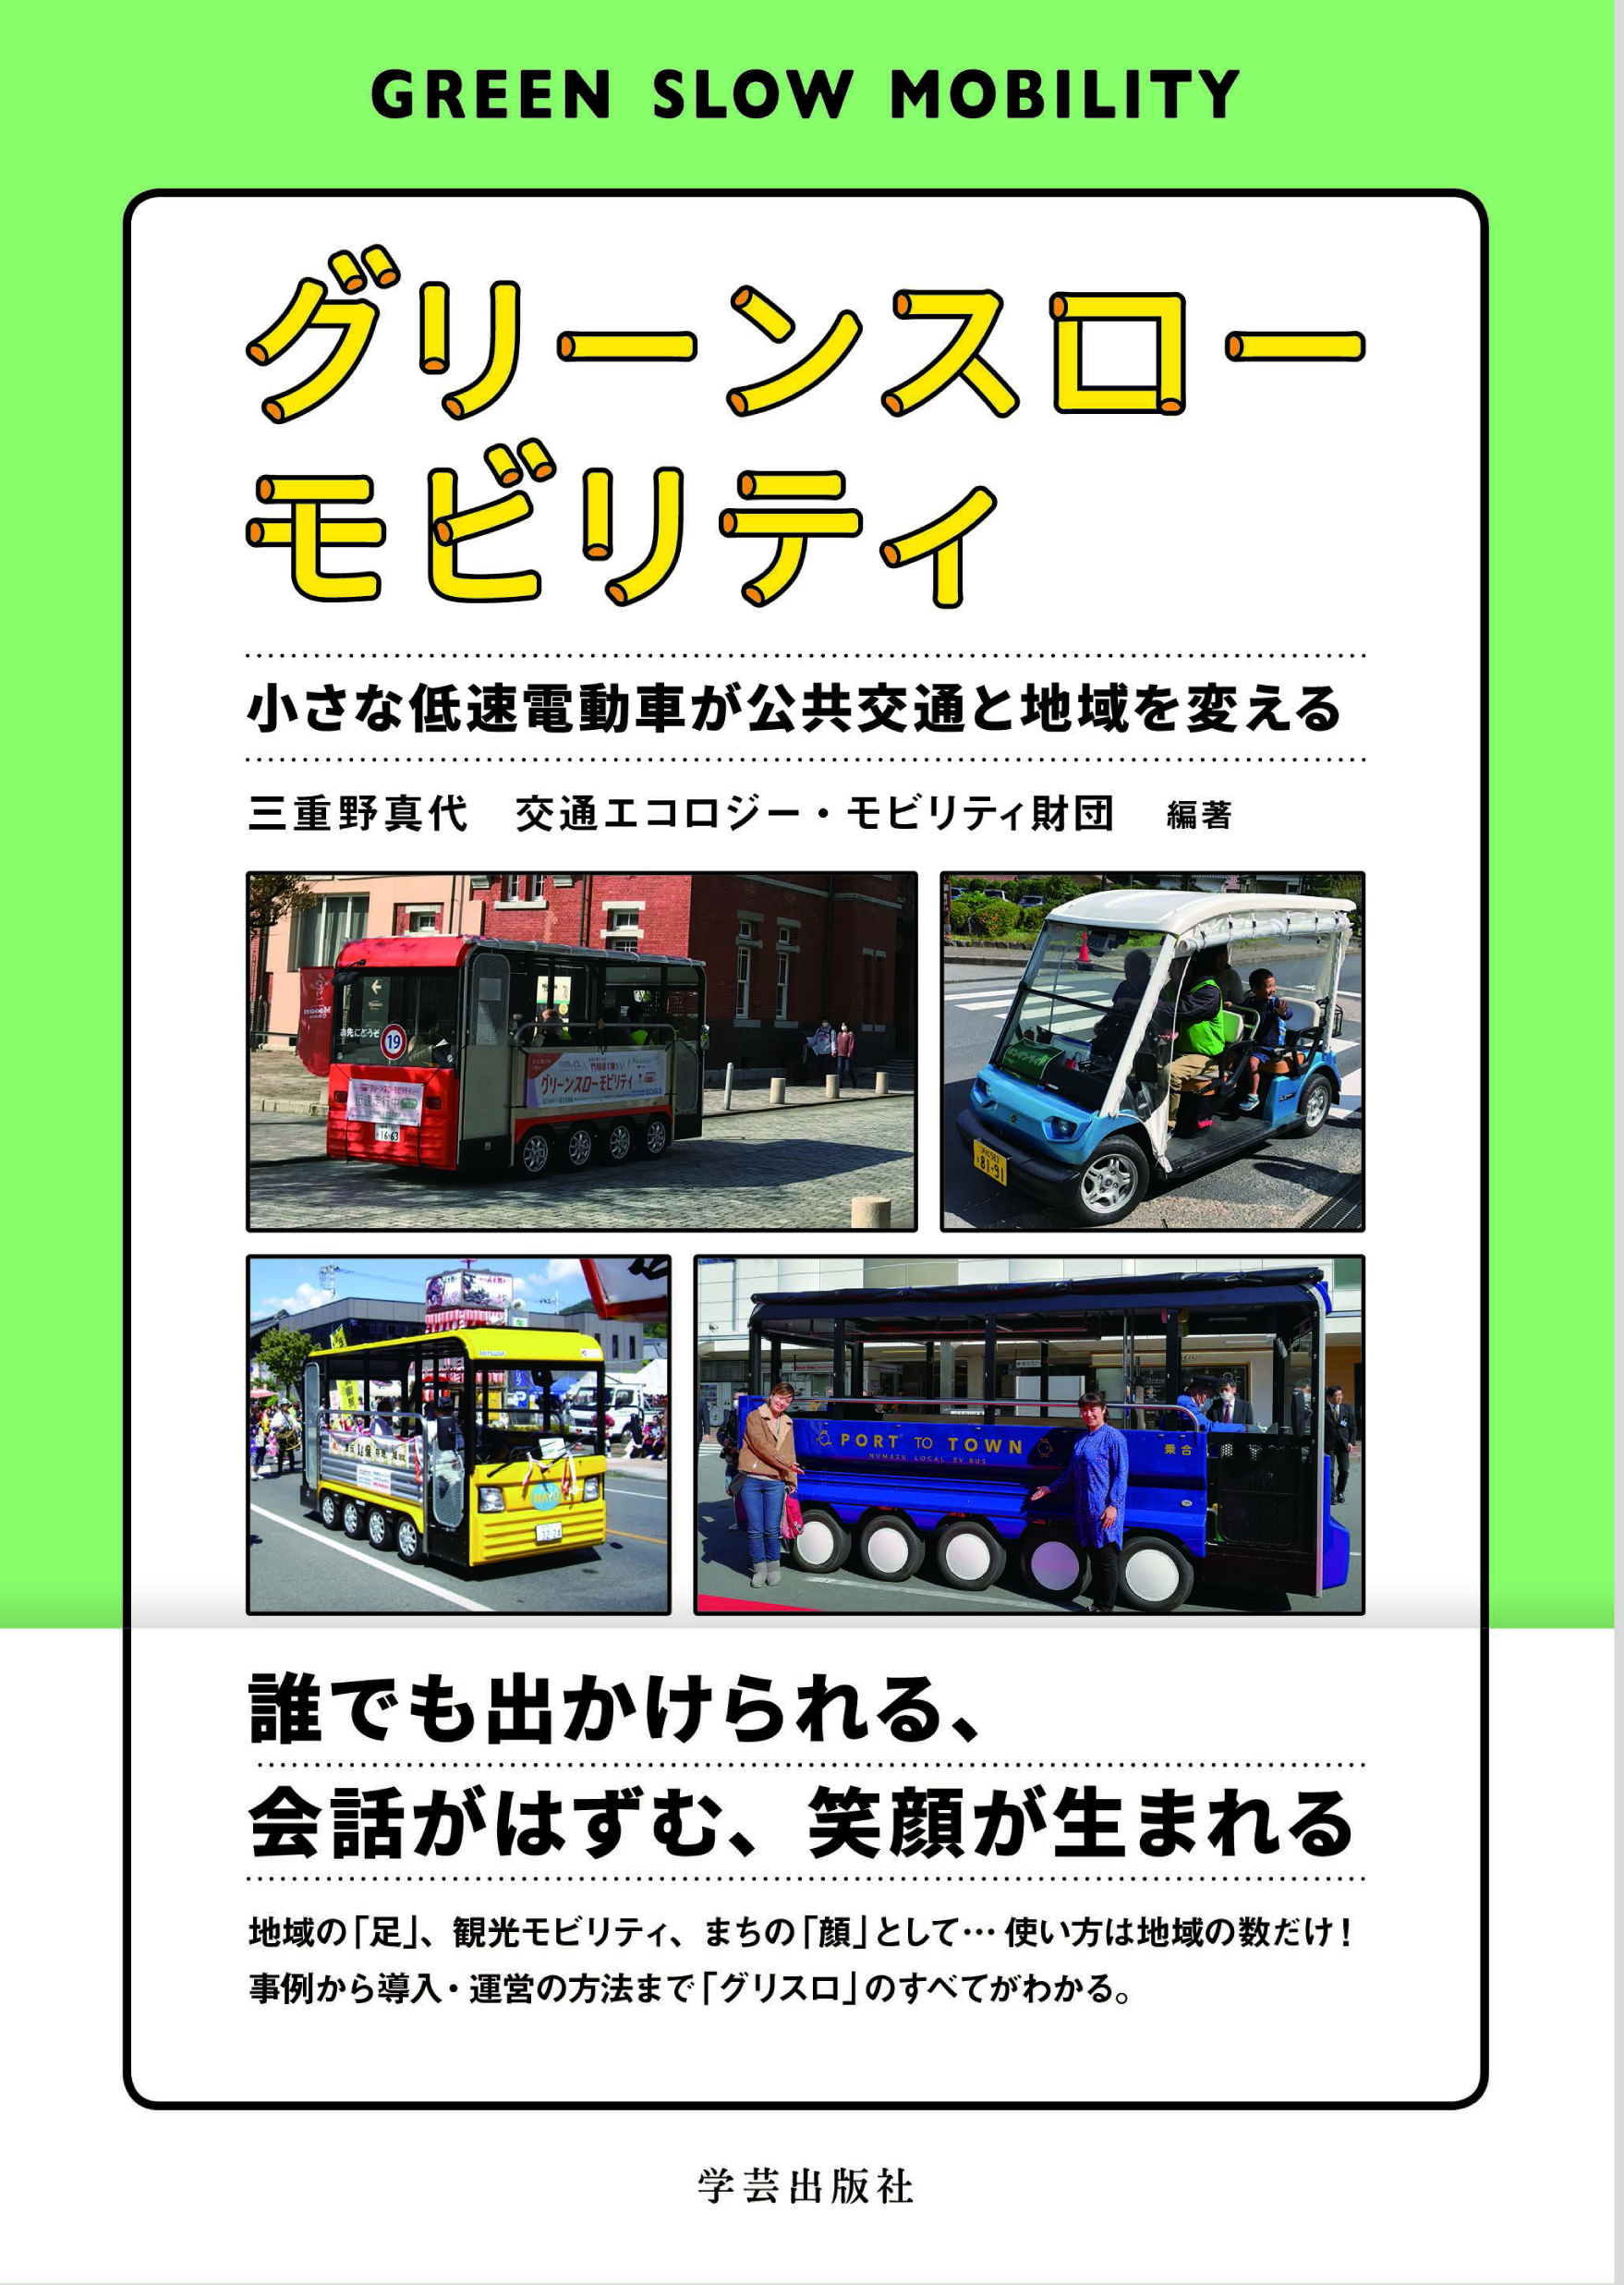 A cover with pictures of green slow electric mobility